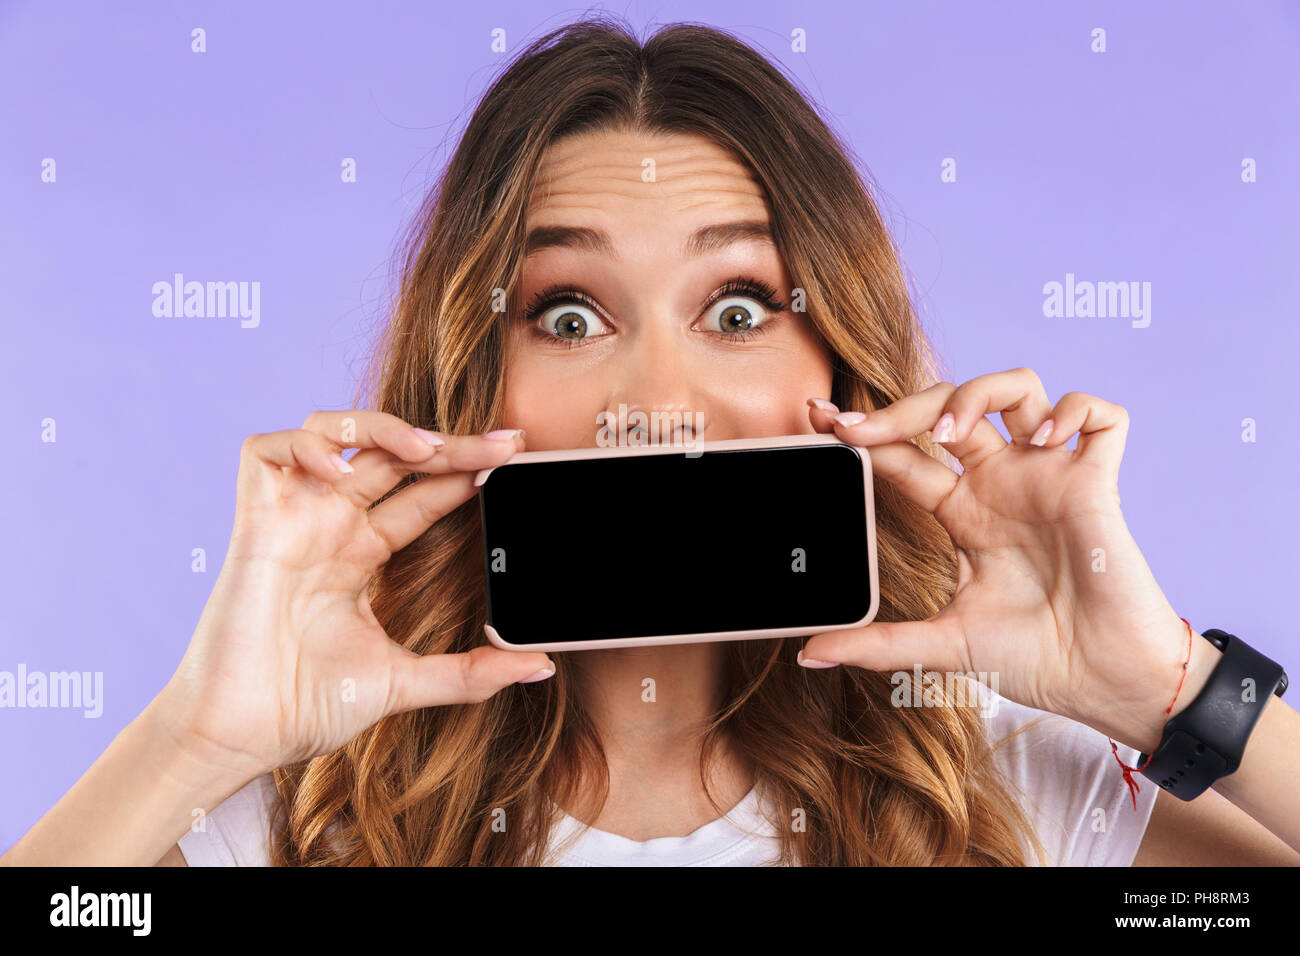 Image of emotional woman isolated over purple wall background showing display of mobile phone. Stock Photo